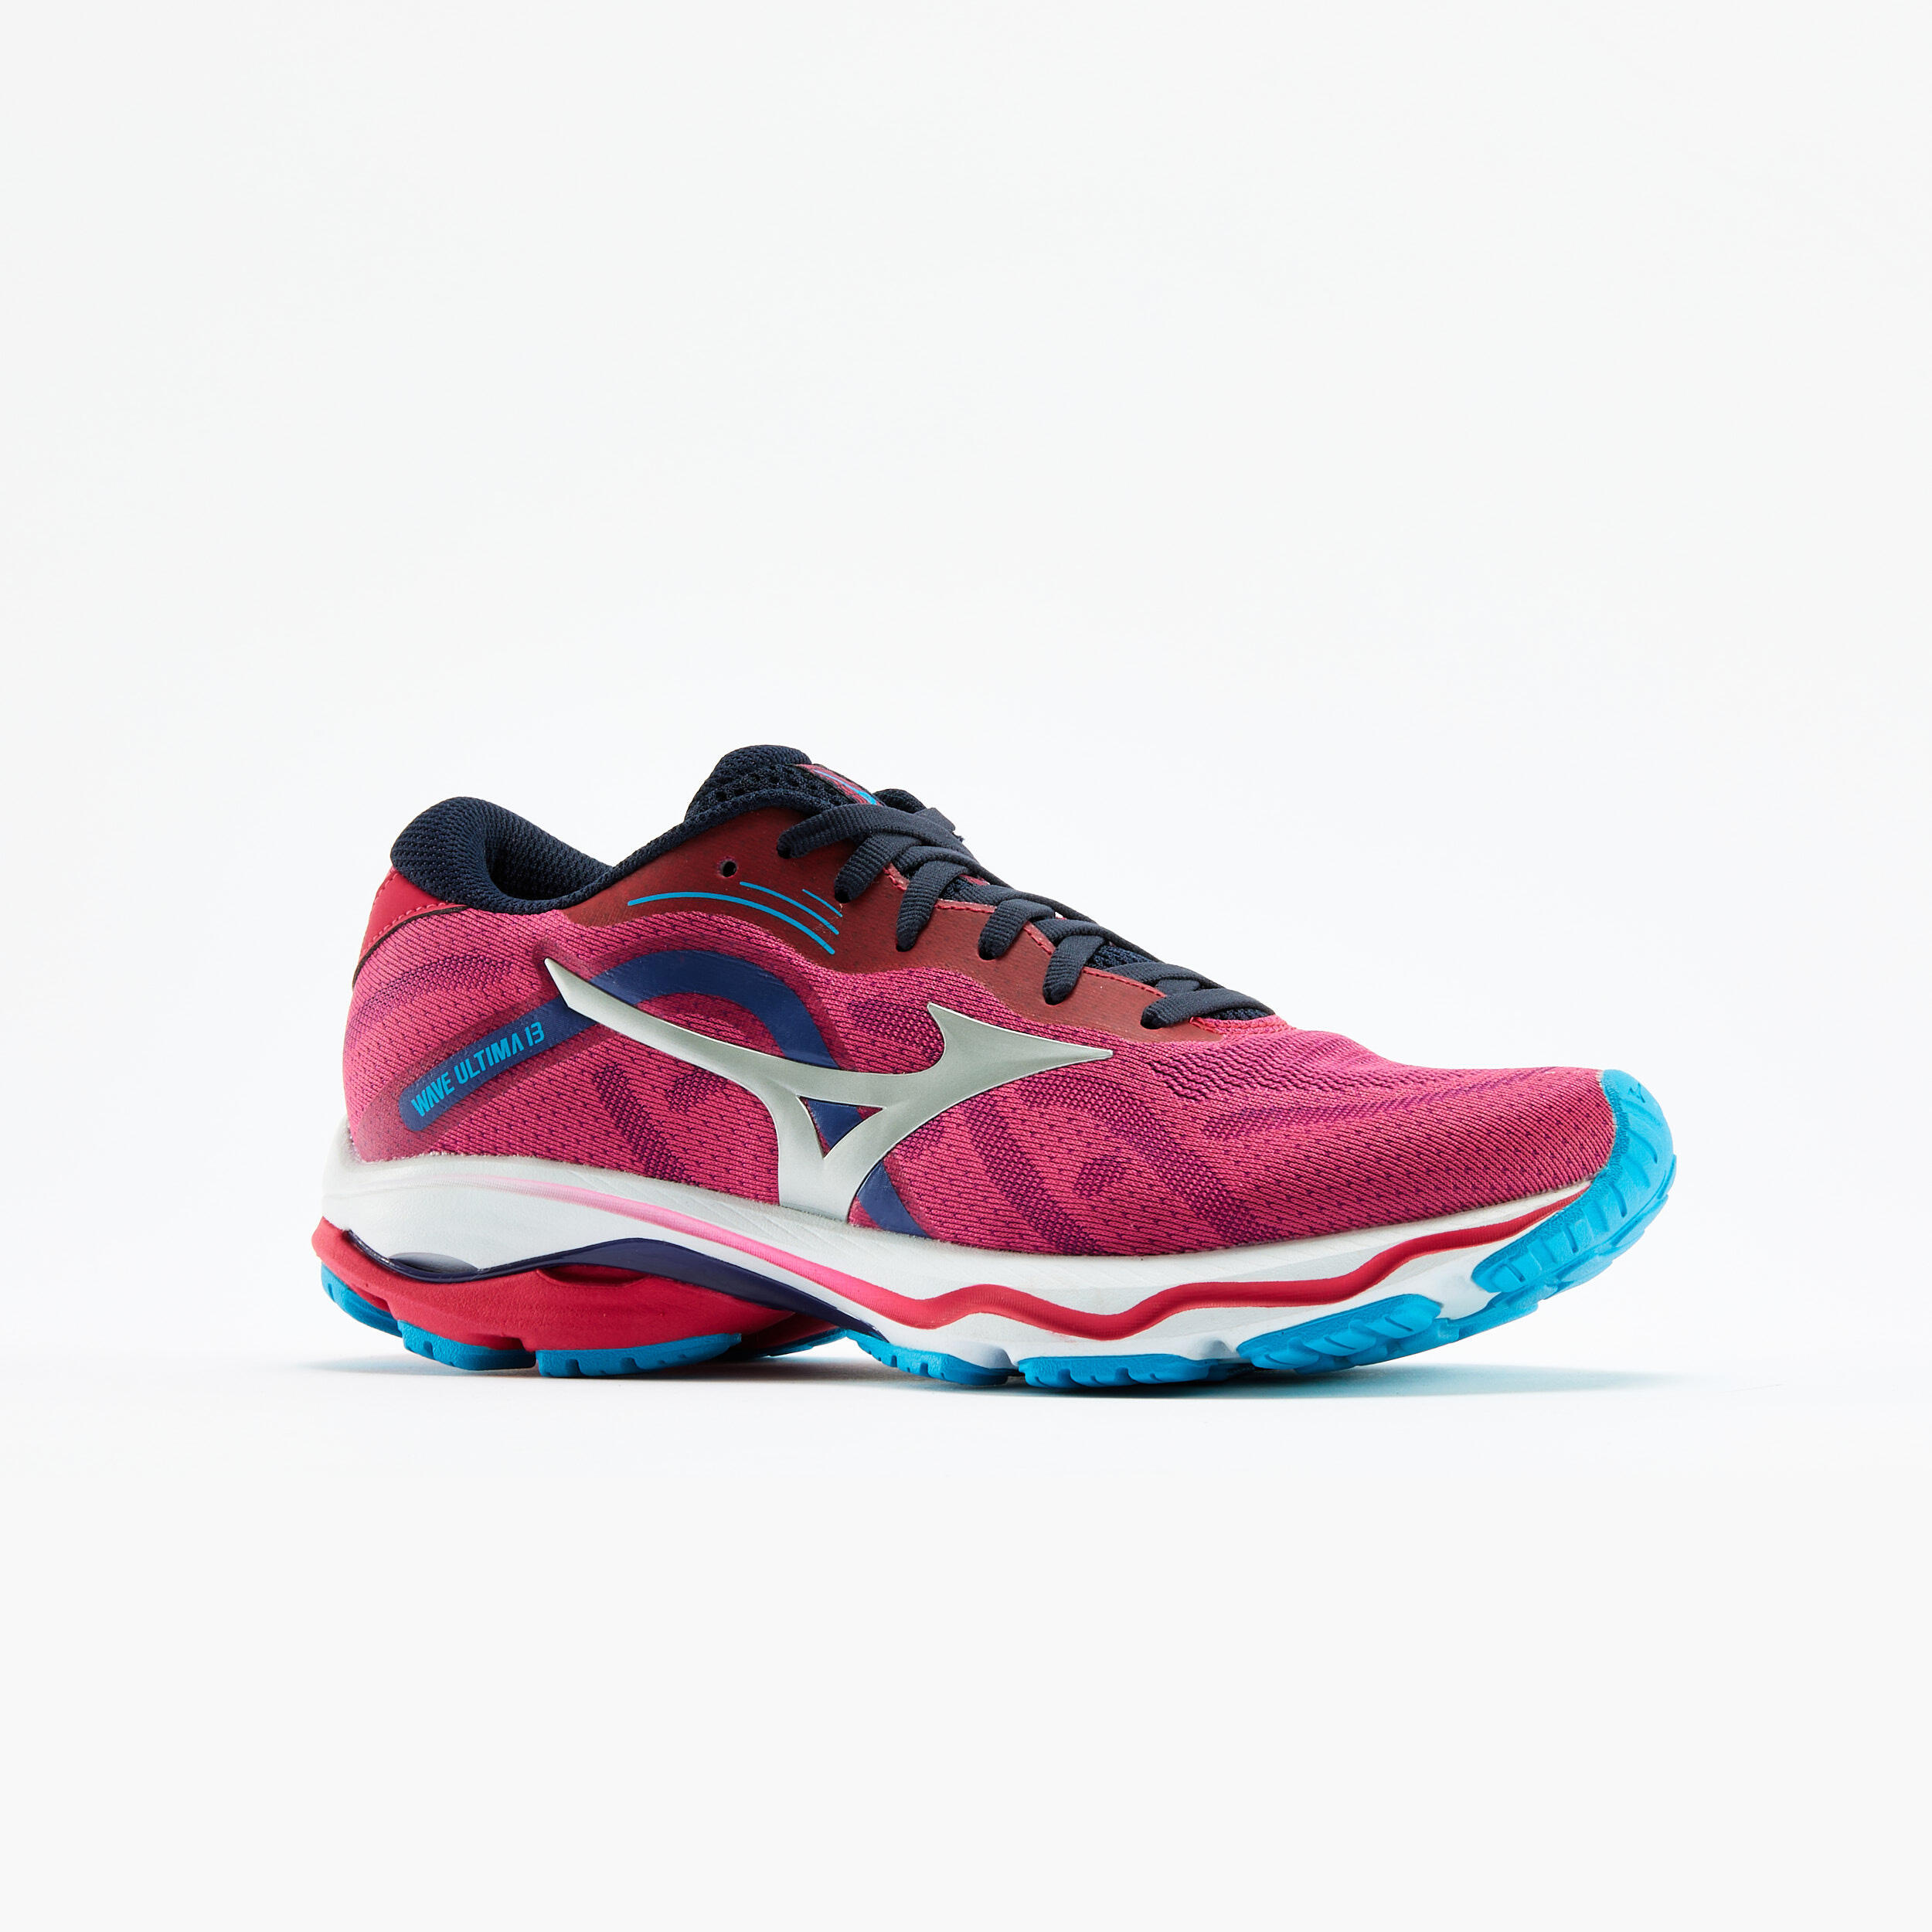 Women's Neutral Running Shoes Wave Ultima 13 - pink 2/7